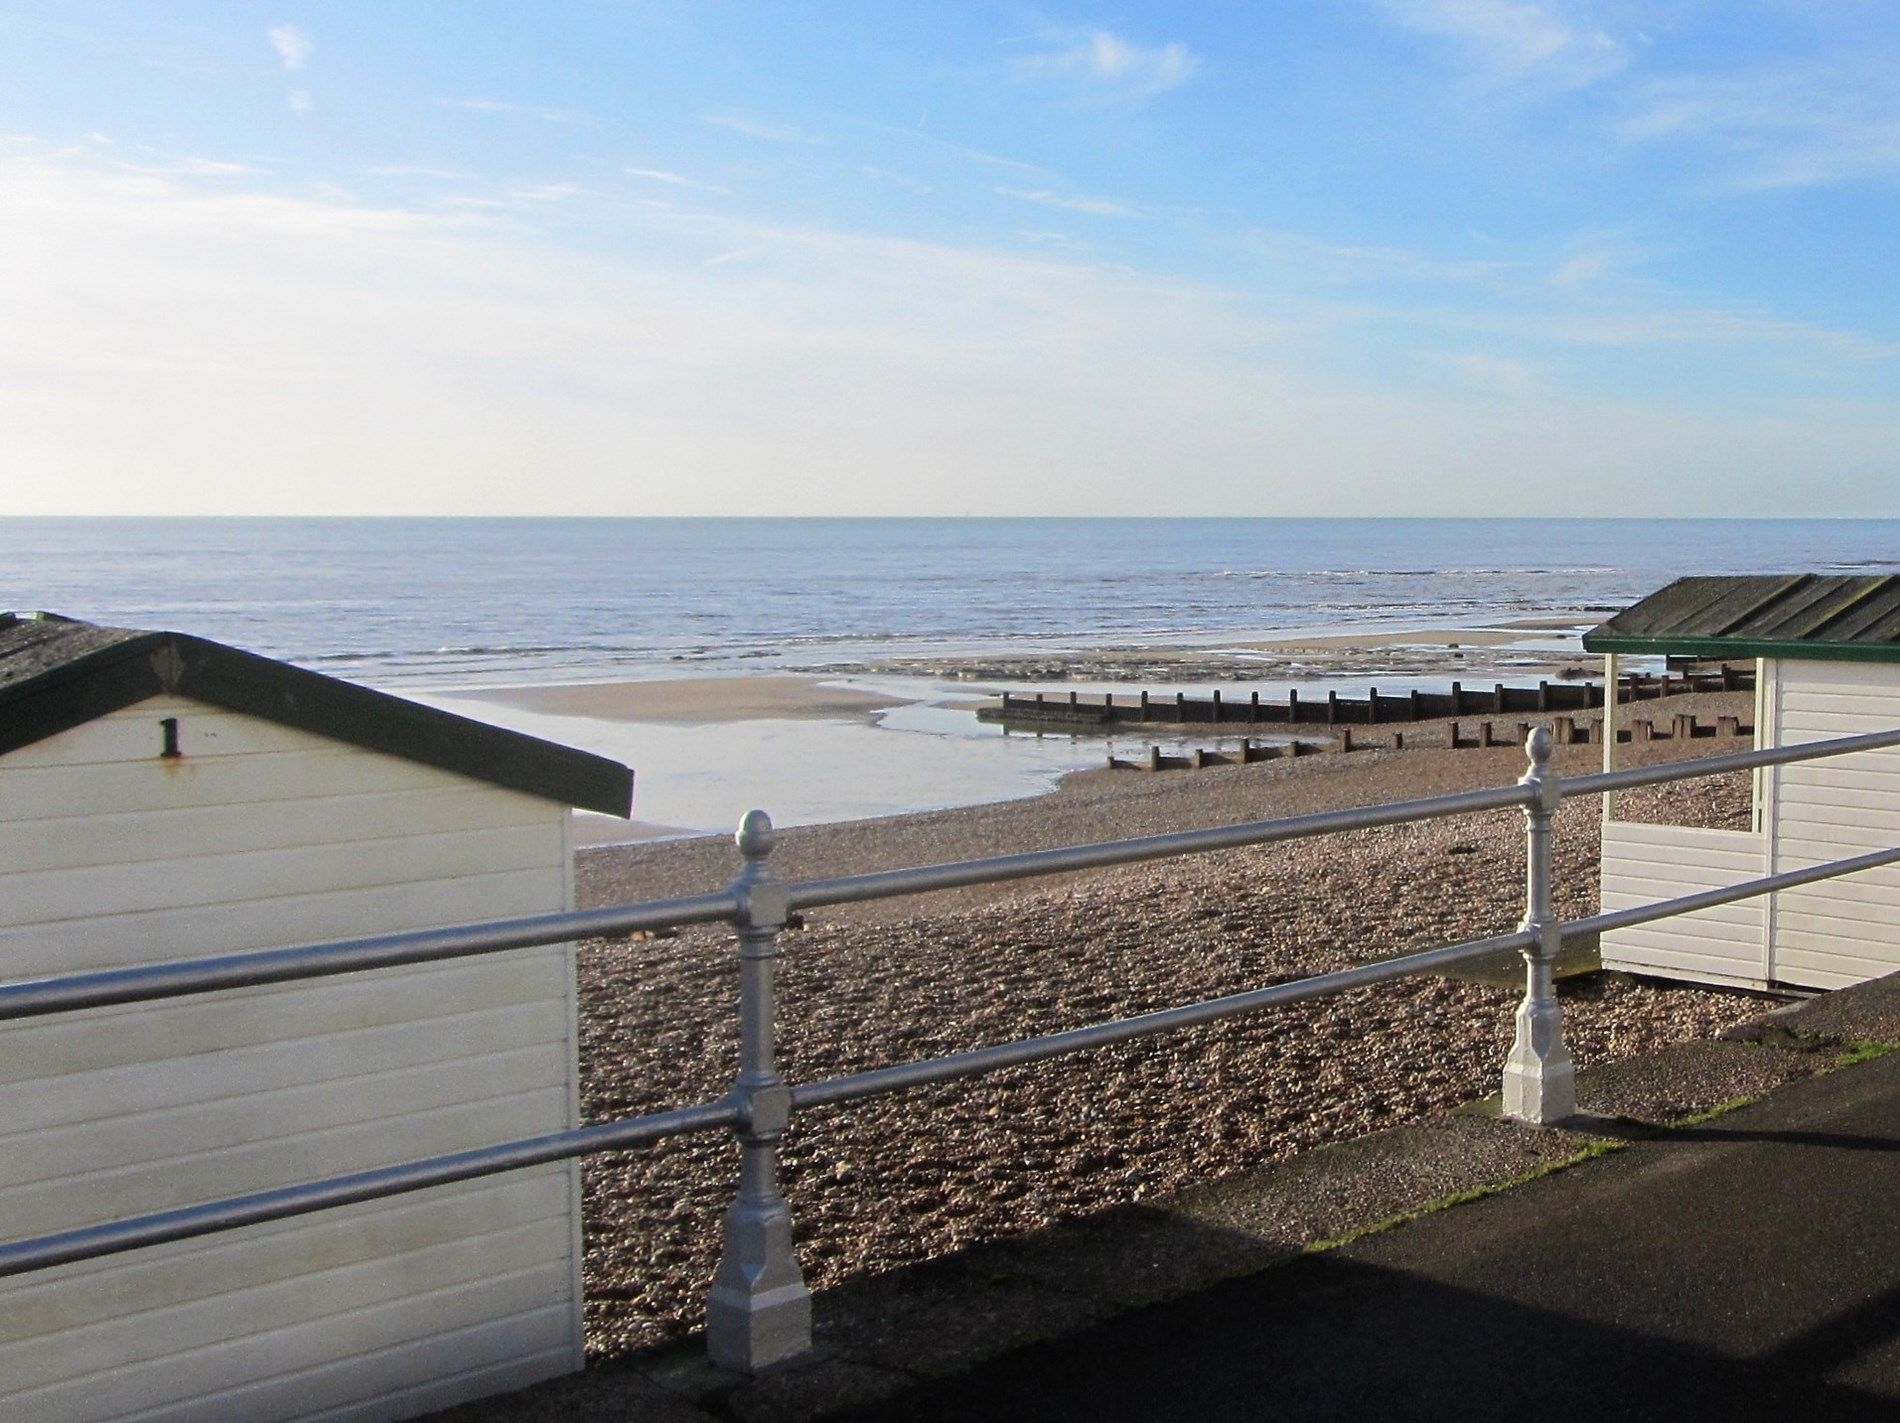 Bexhill-on-sea